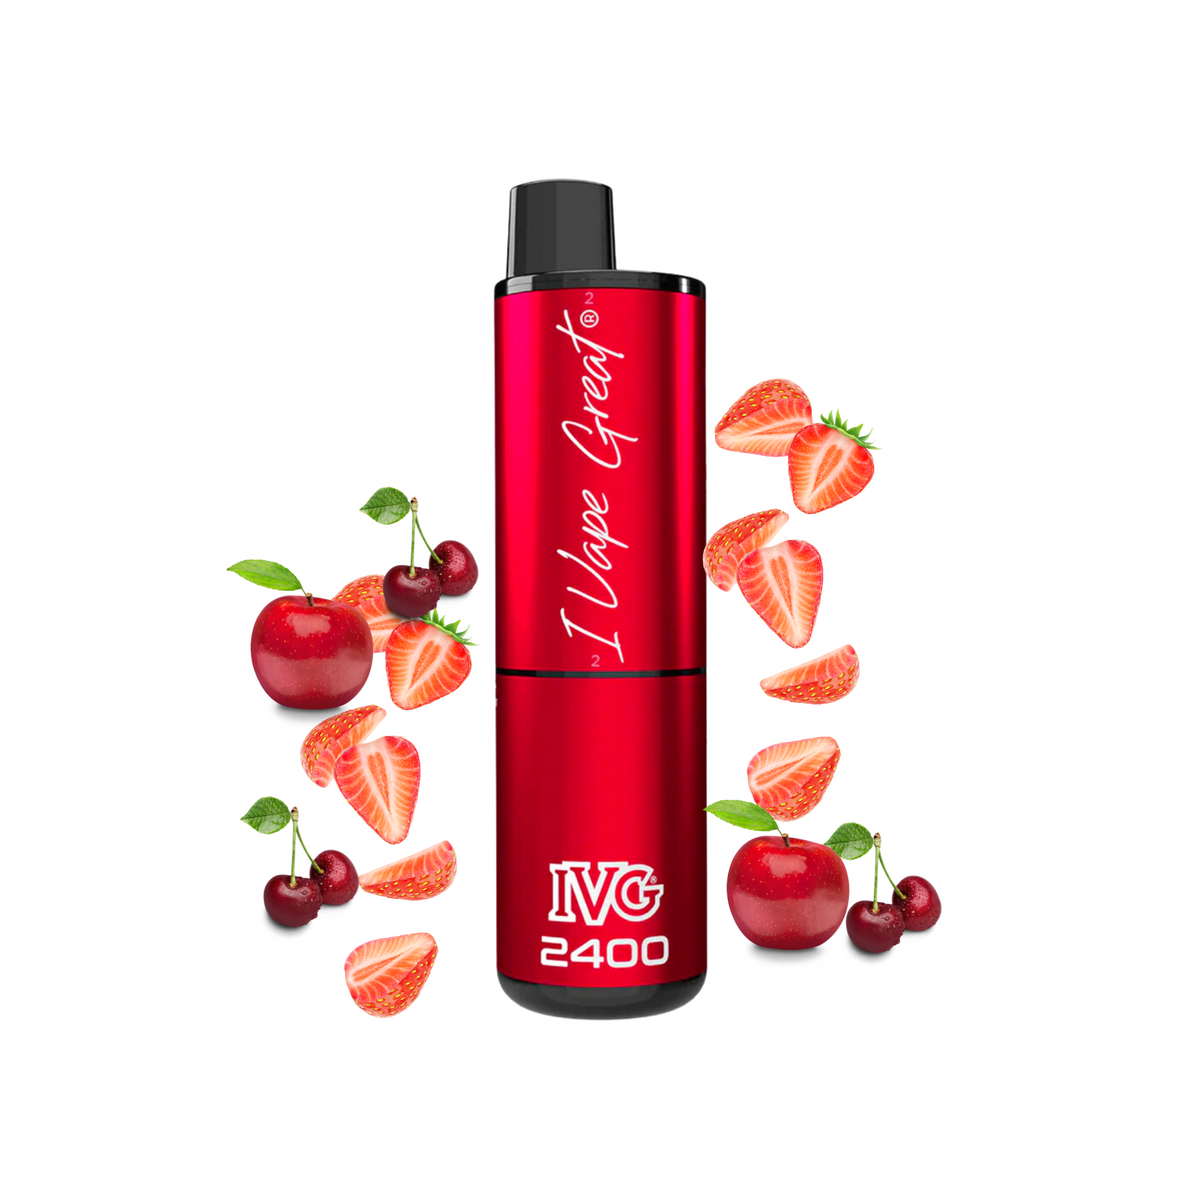 IVG 2400 puff - MULTI RED Edition 4 in 1